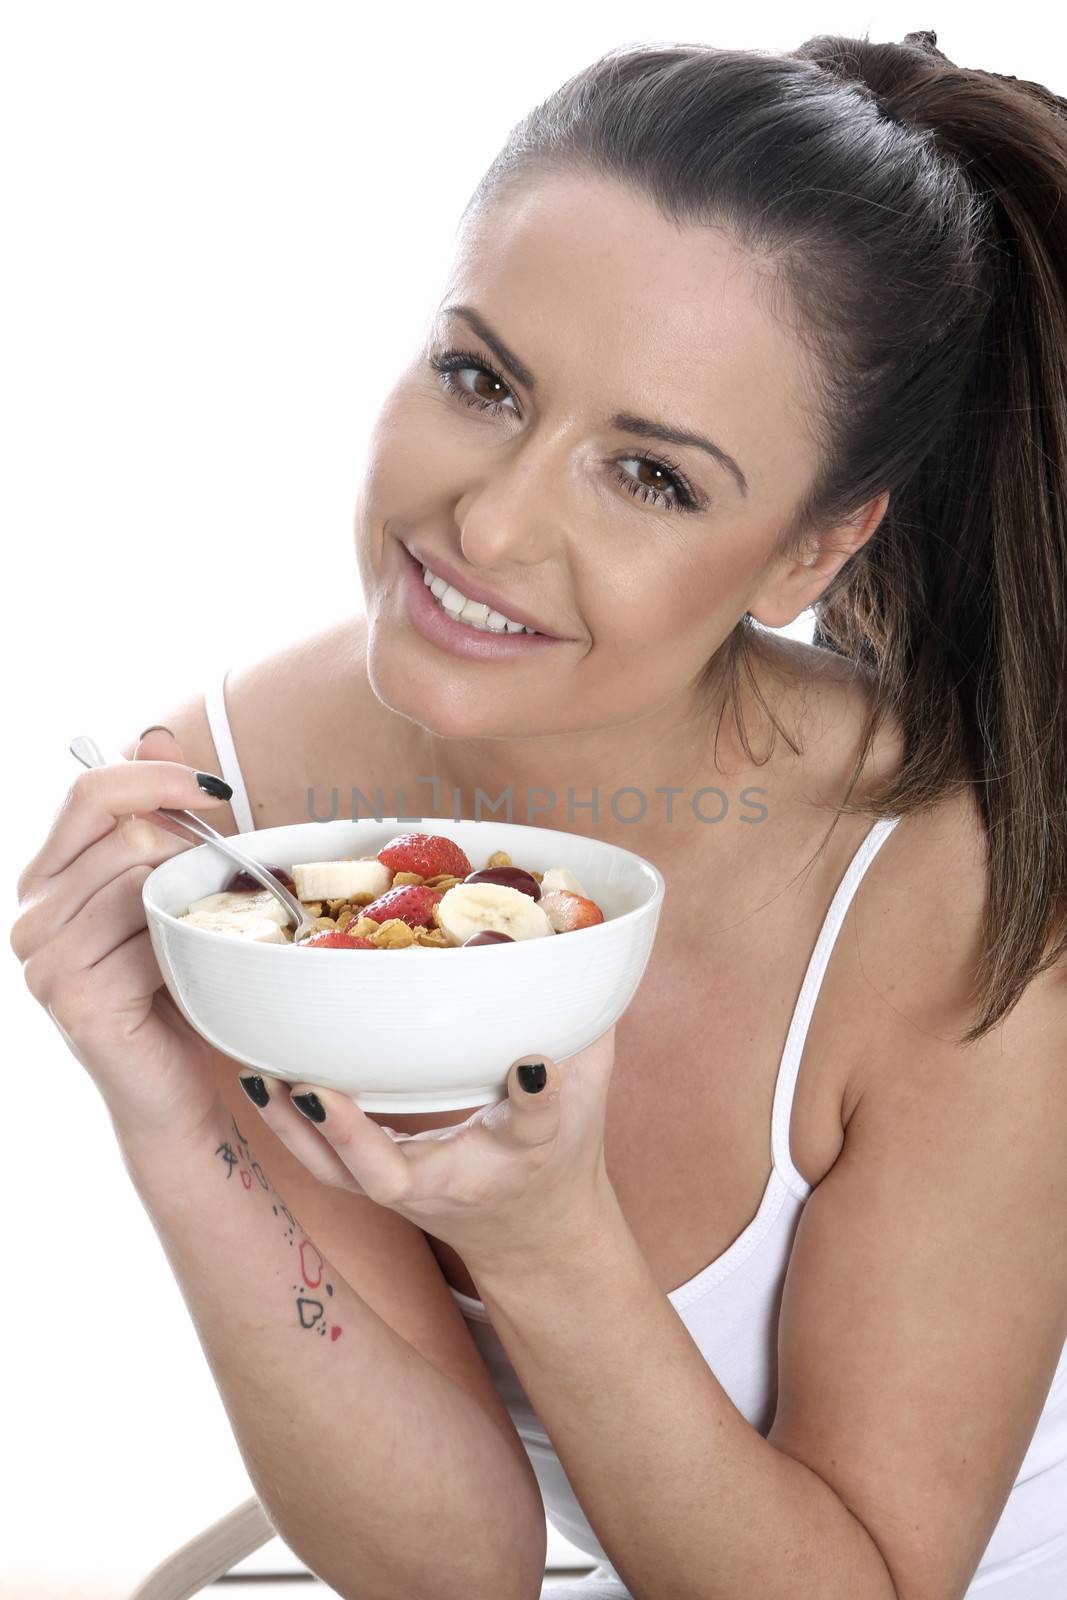 Model Released. Young Woman Eating Breakfast Cereal and Fruit by Whiteboxmedia